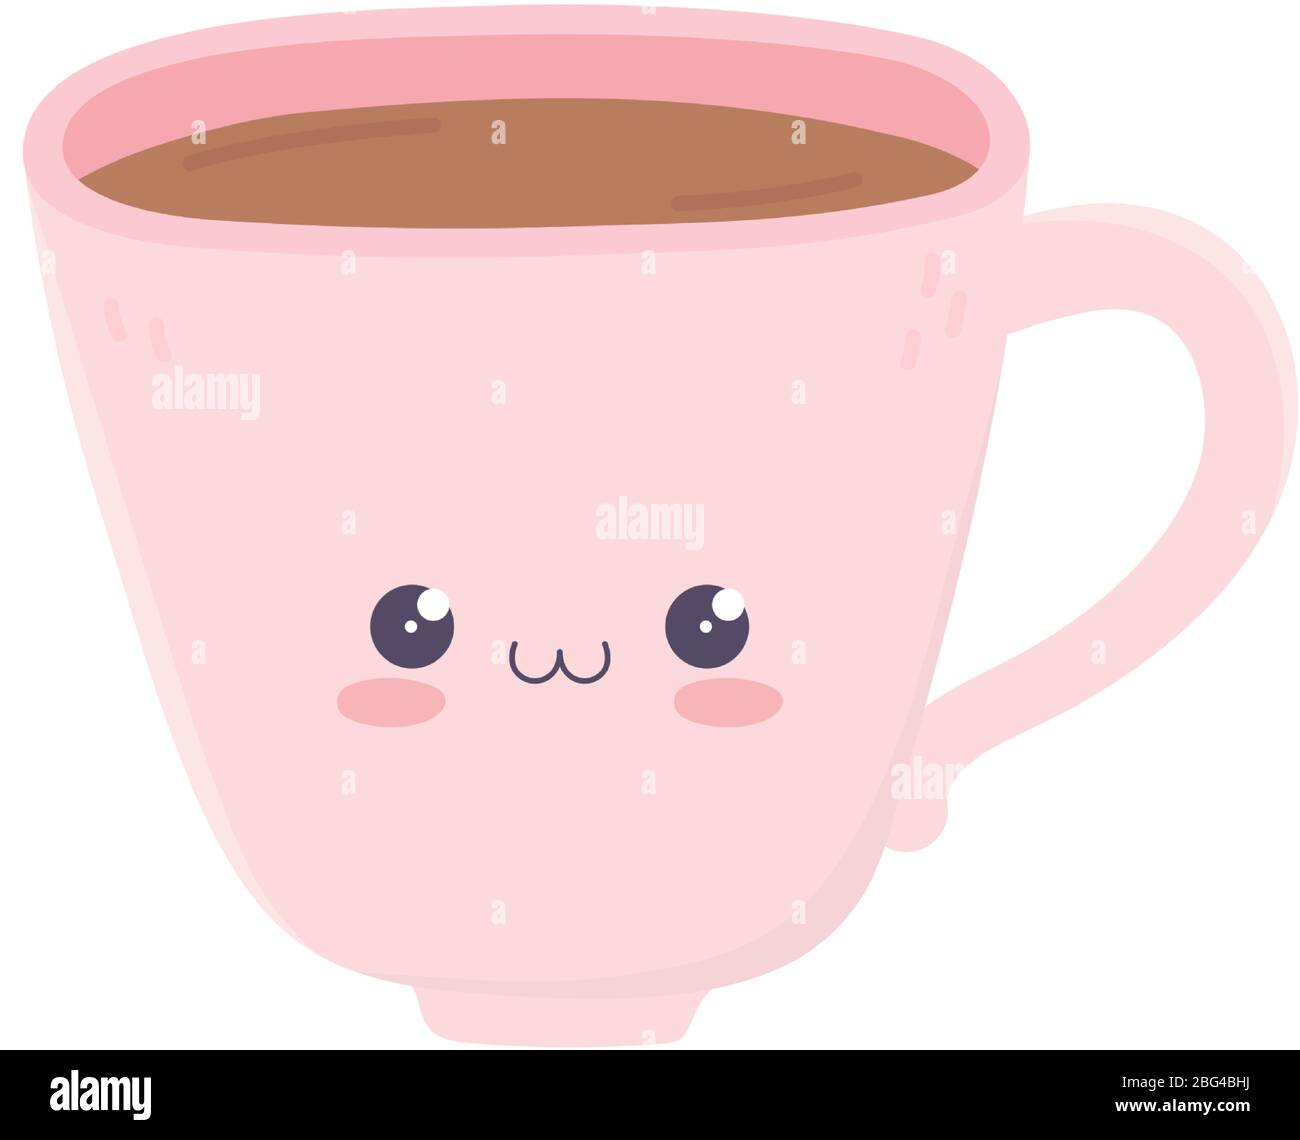 Cute Coffee Cup Isolated White Cartoon Character Happy Design Stock Vector  by ©Huhli13 467696704